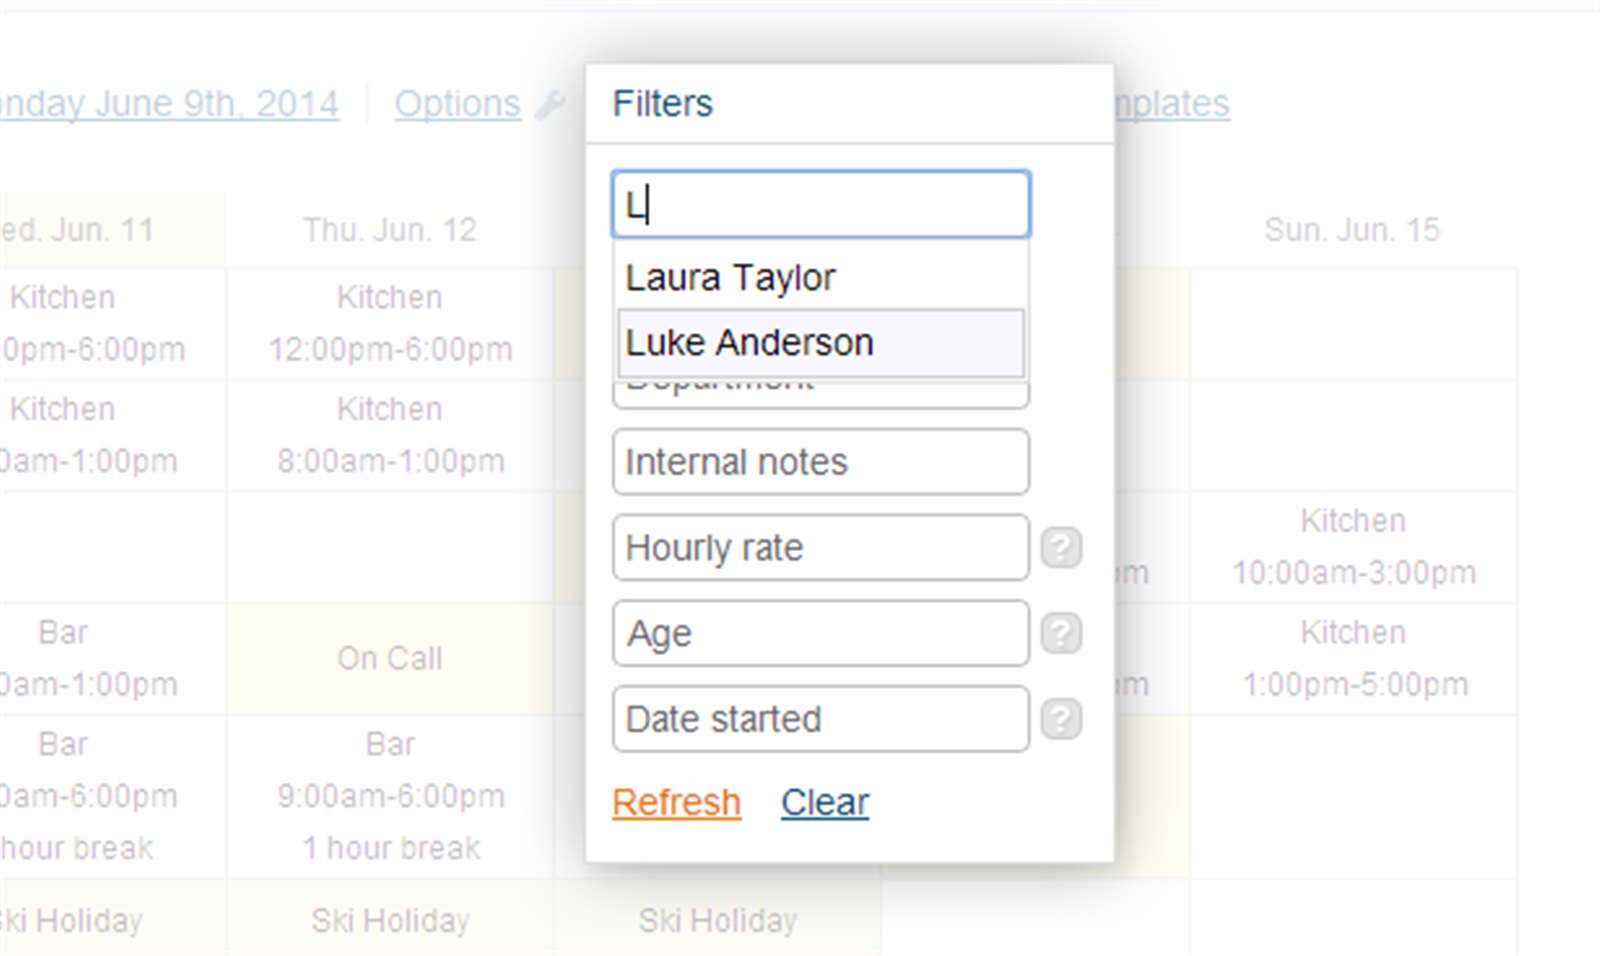 Auto-complete Now Available with Filters